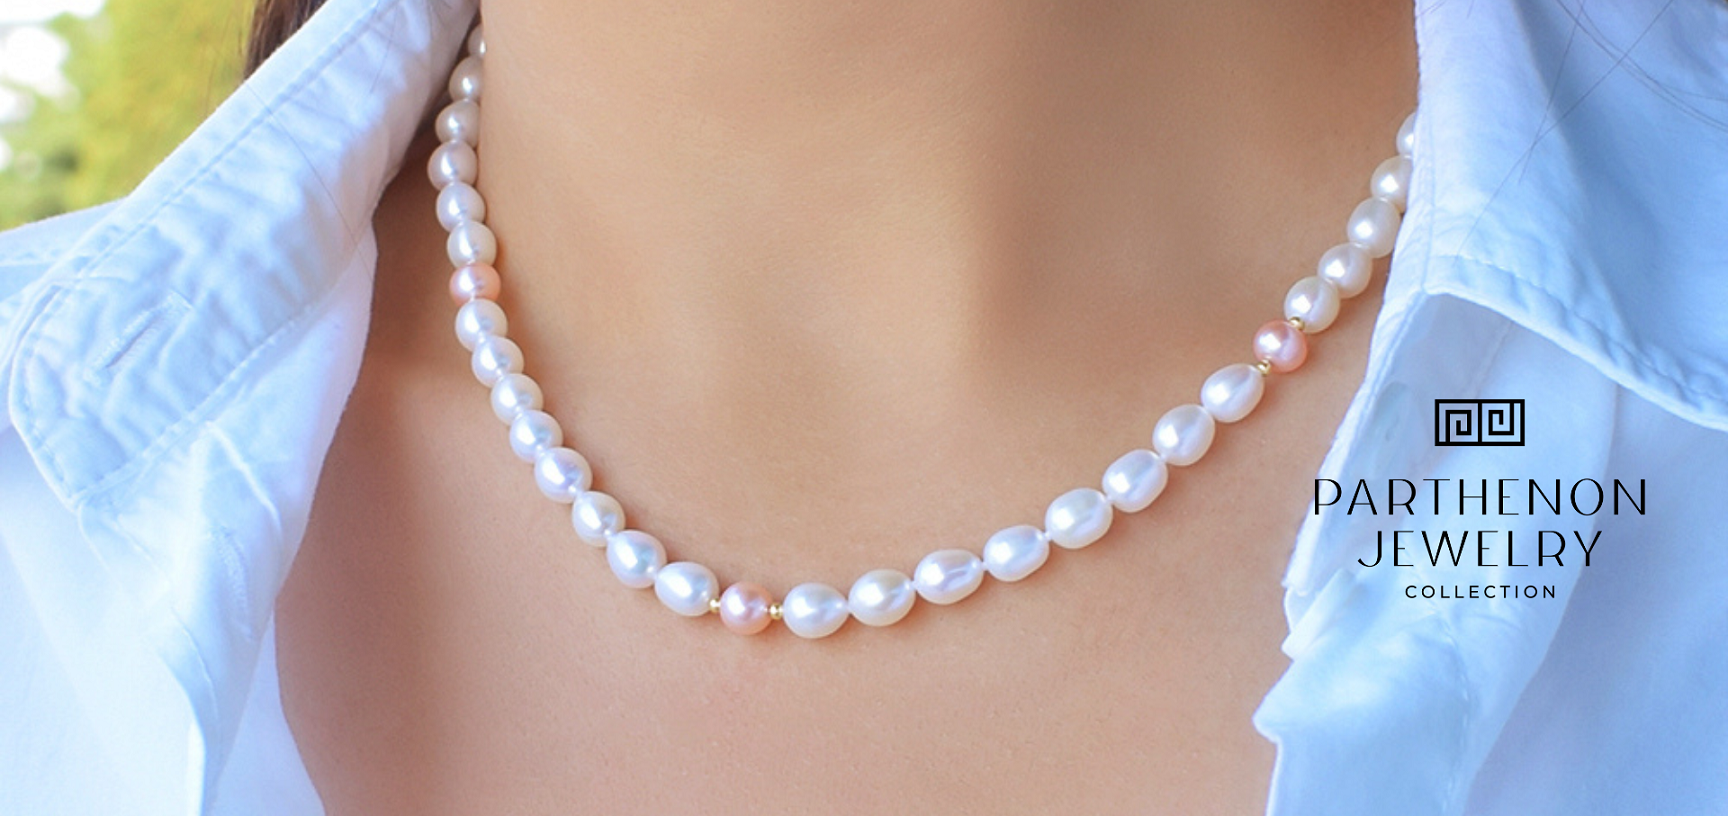 Everything You Want to Know About Your Precious Pearls - Parthenon Jewelry